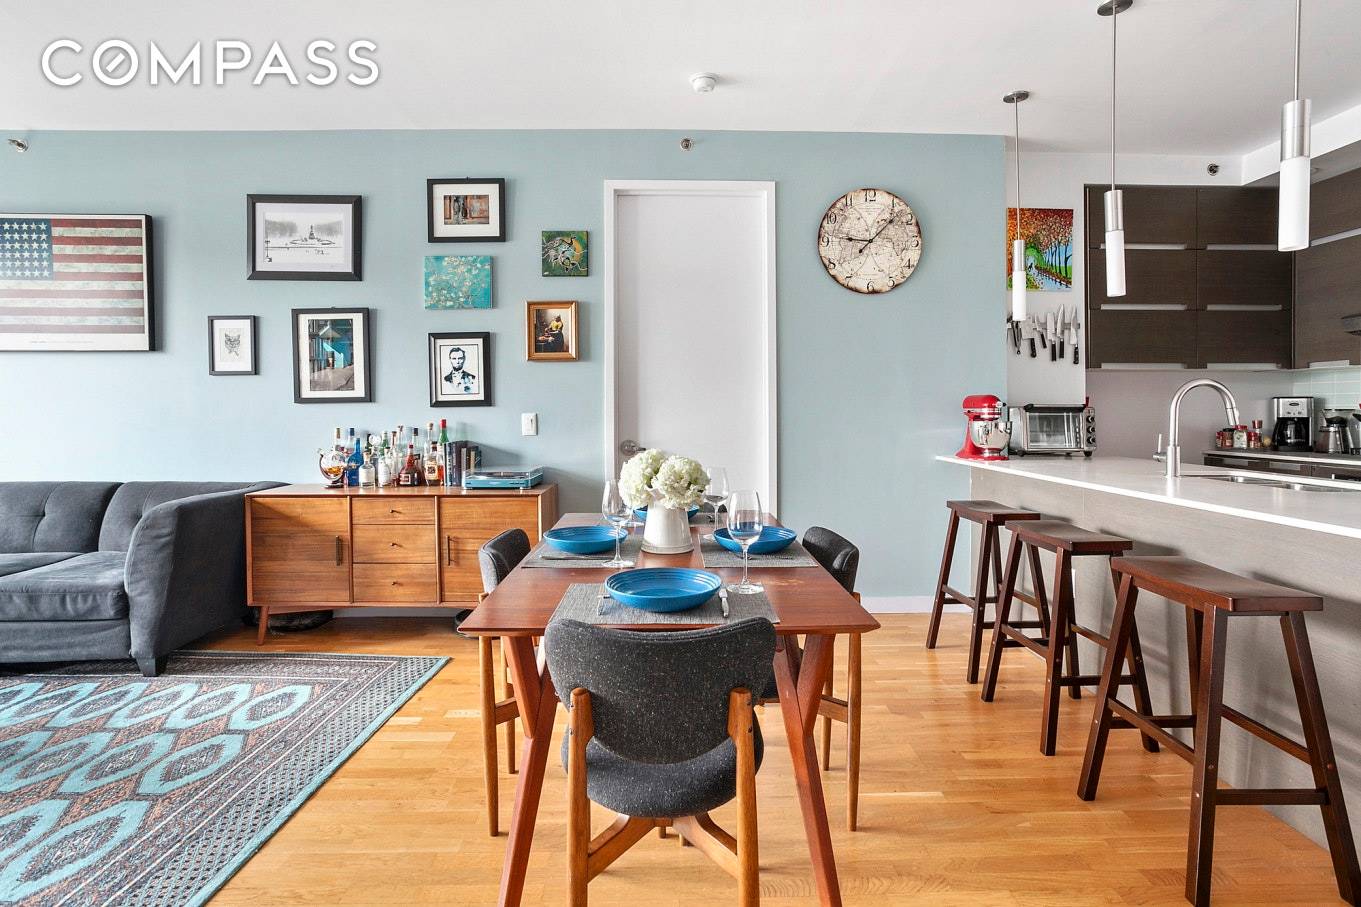 Spacious 2 bedroom penthouse at the Isabella in the heart of Clinton Hill.